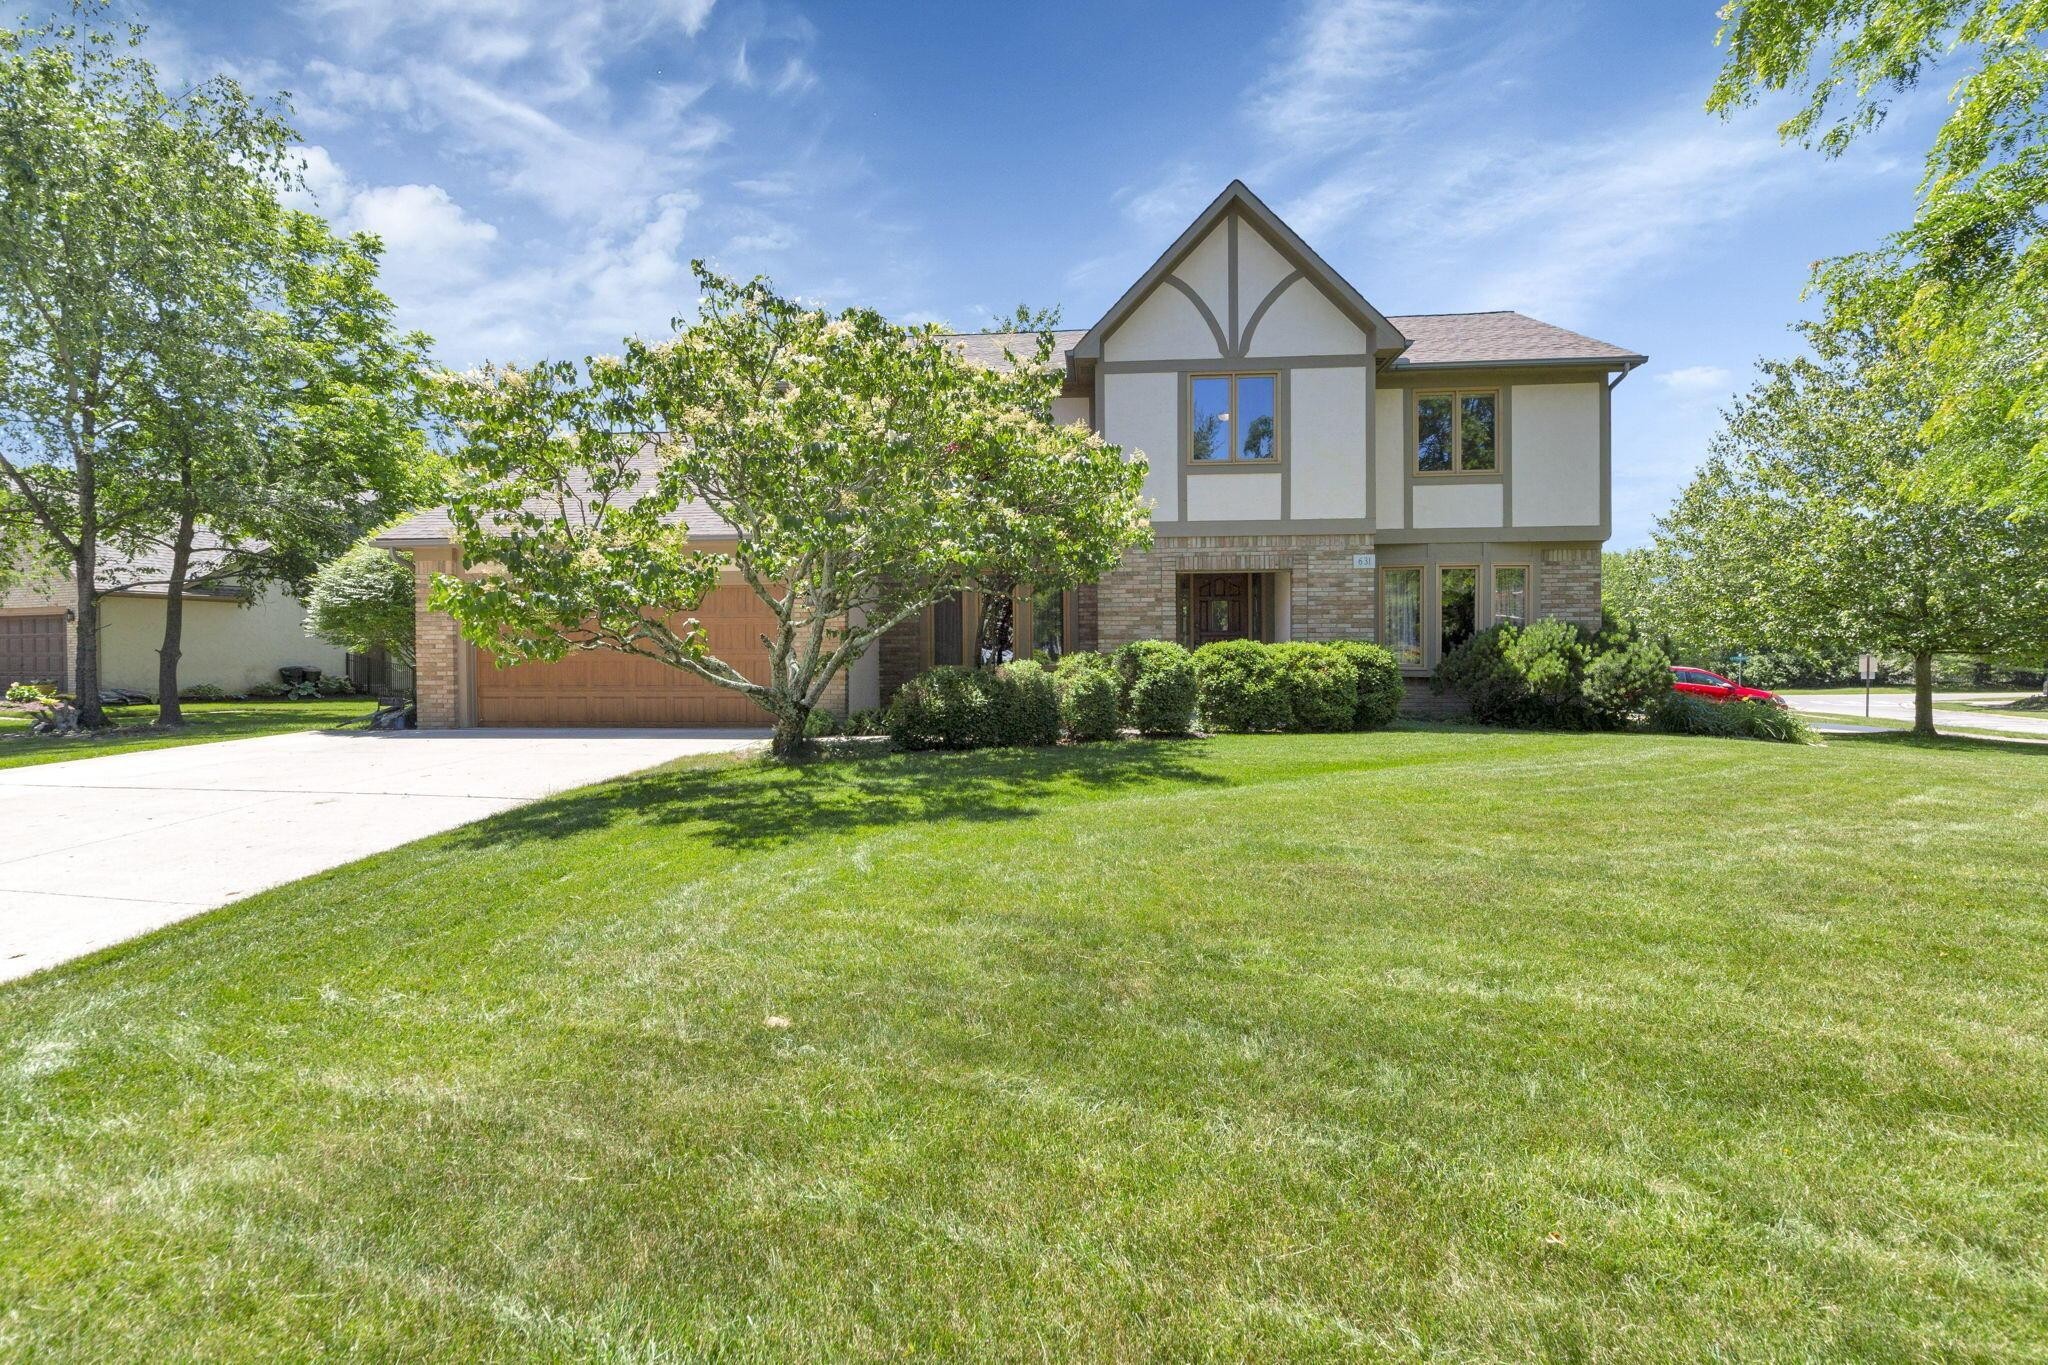 2. 631 Hickory View Court